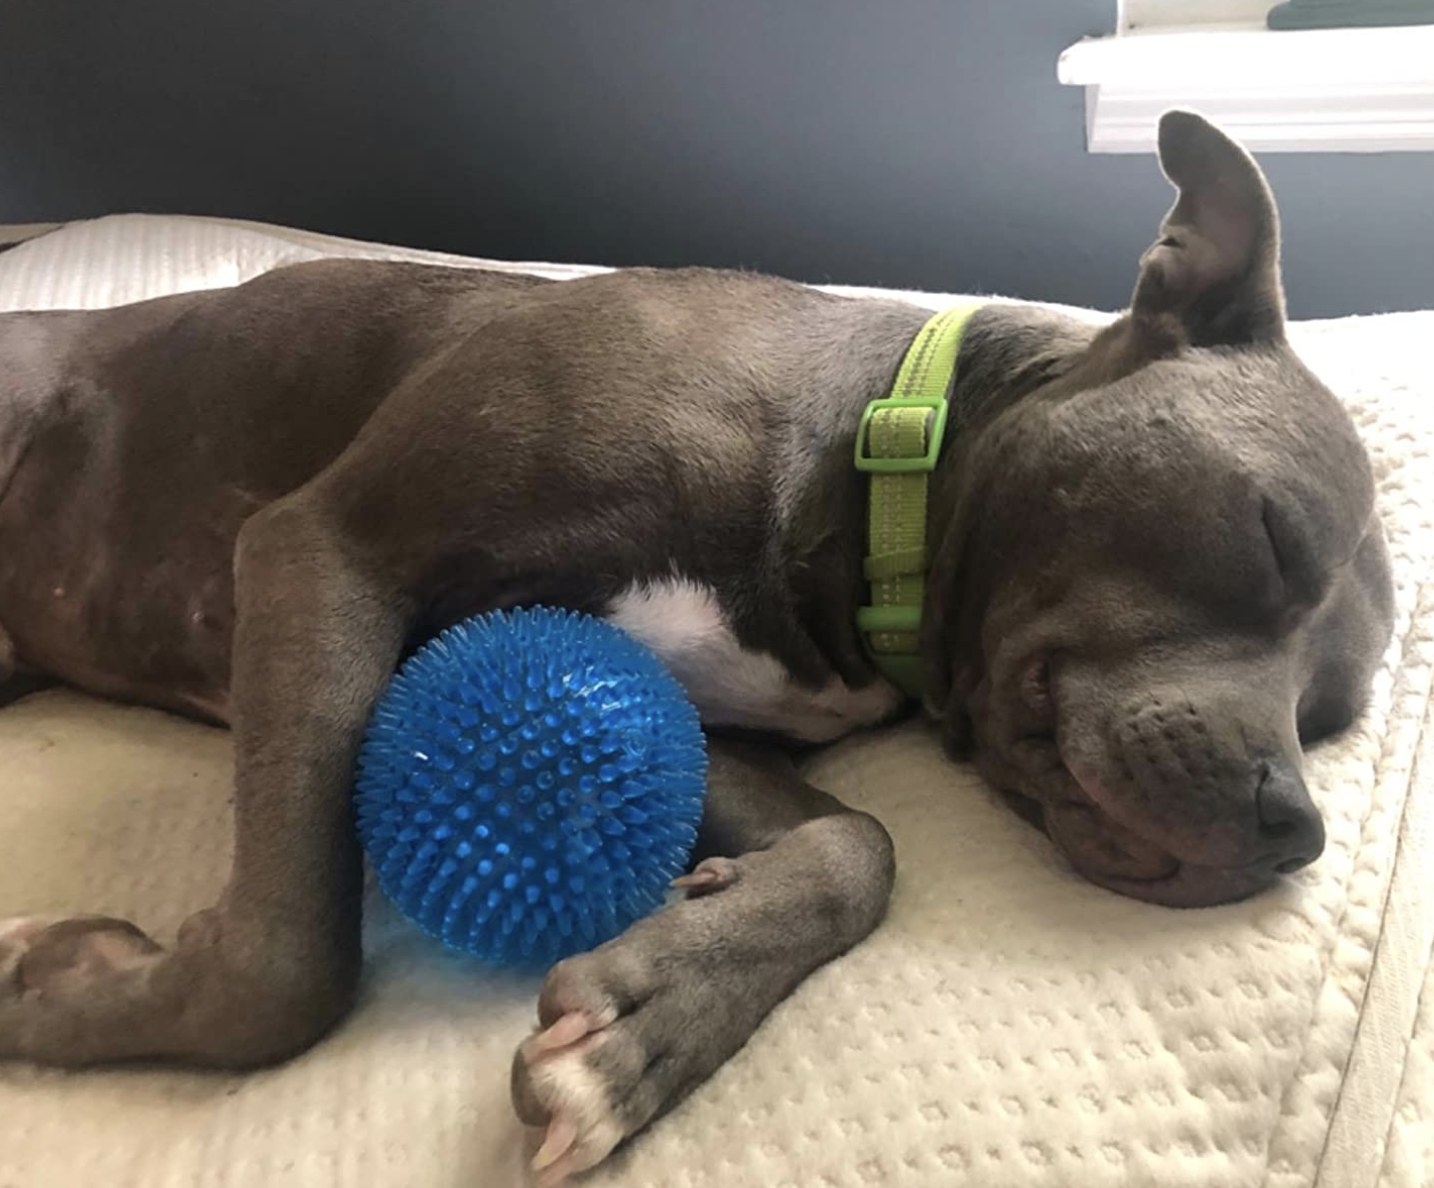 a grey god with a green collar napping with a blue rubber spiked ball in its arms